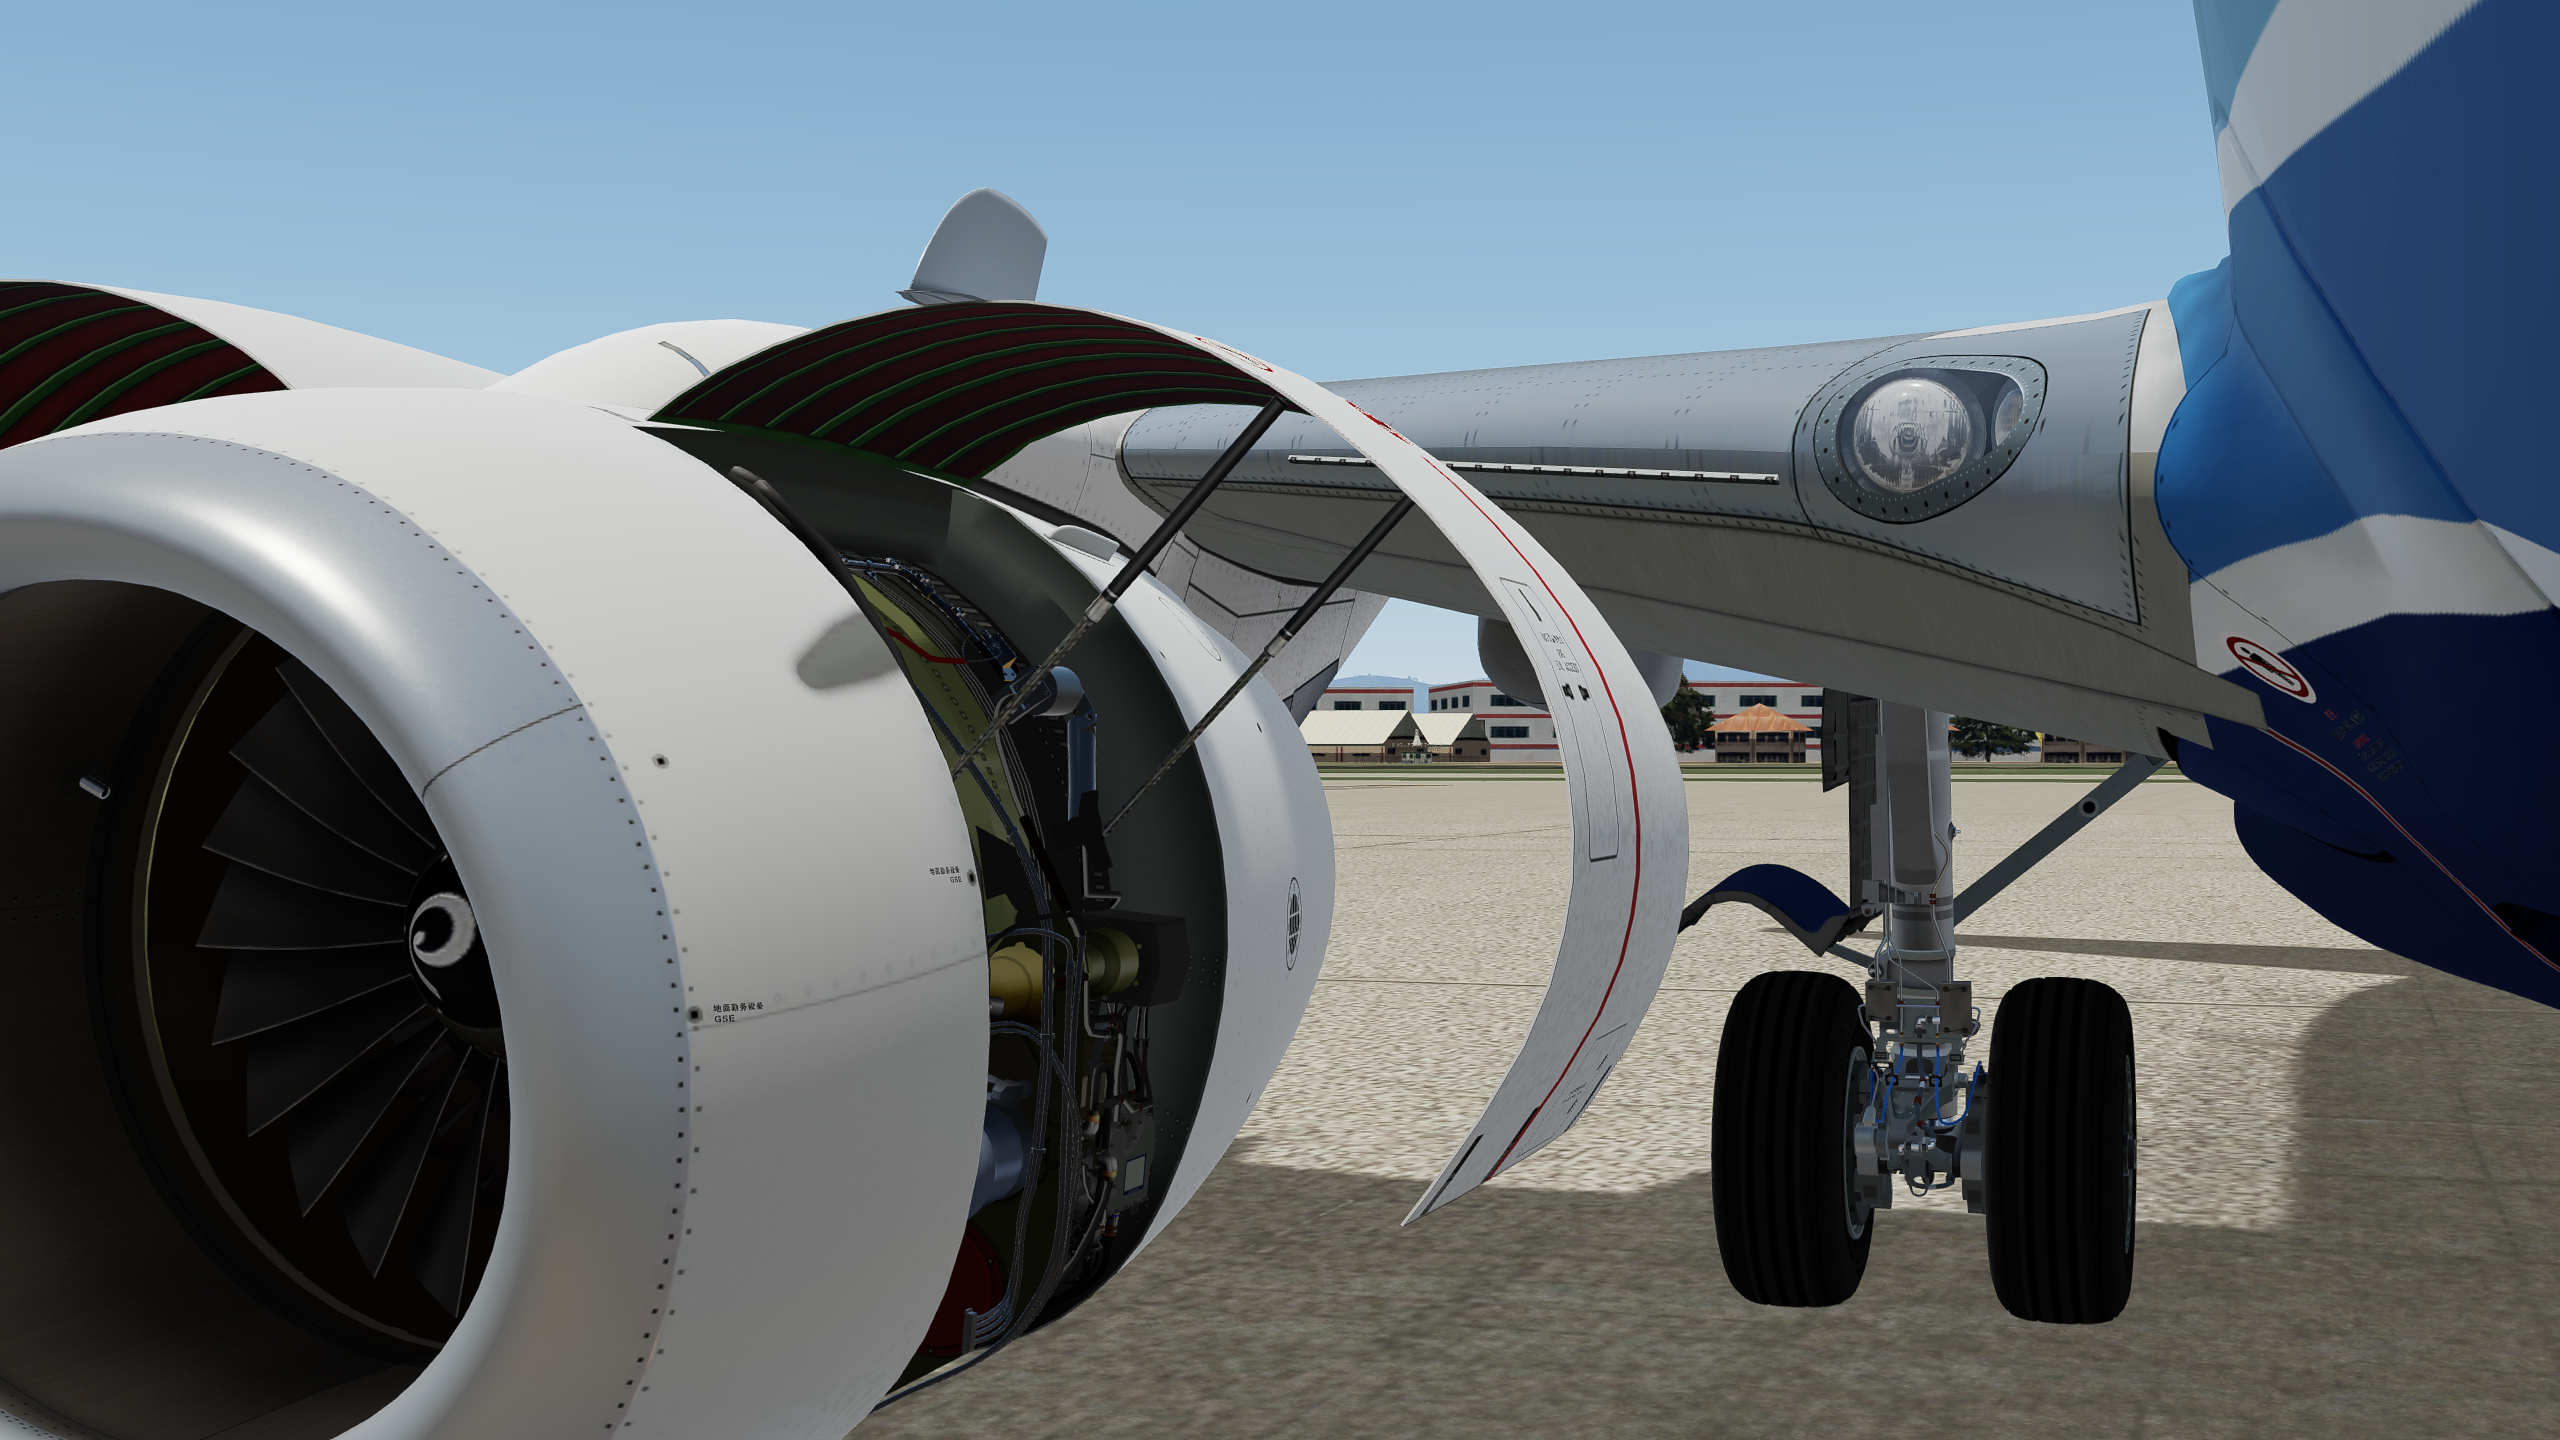 Lockheed Martin_ Prepar3D_ v5 with WideServer_ waiting for clients 2022_4_26 19_49_46.png